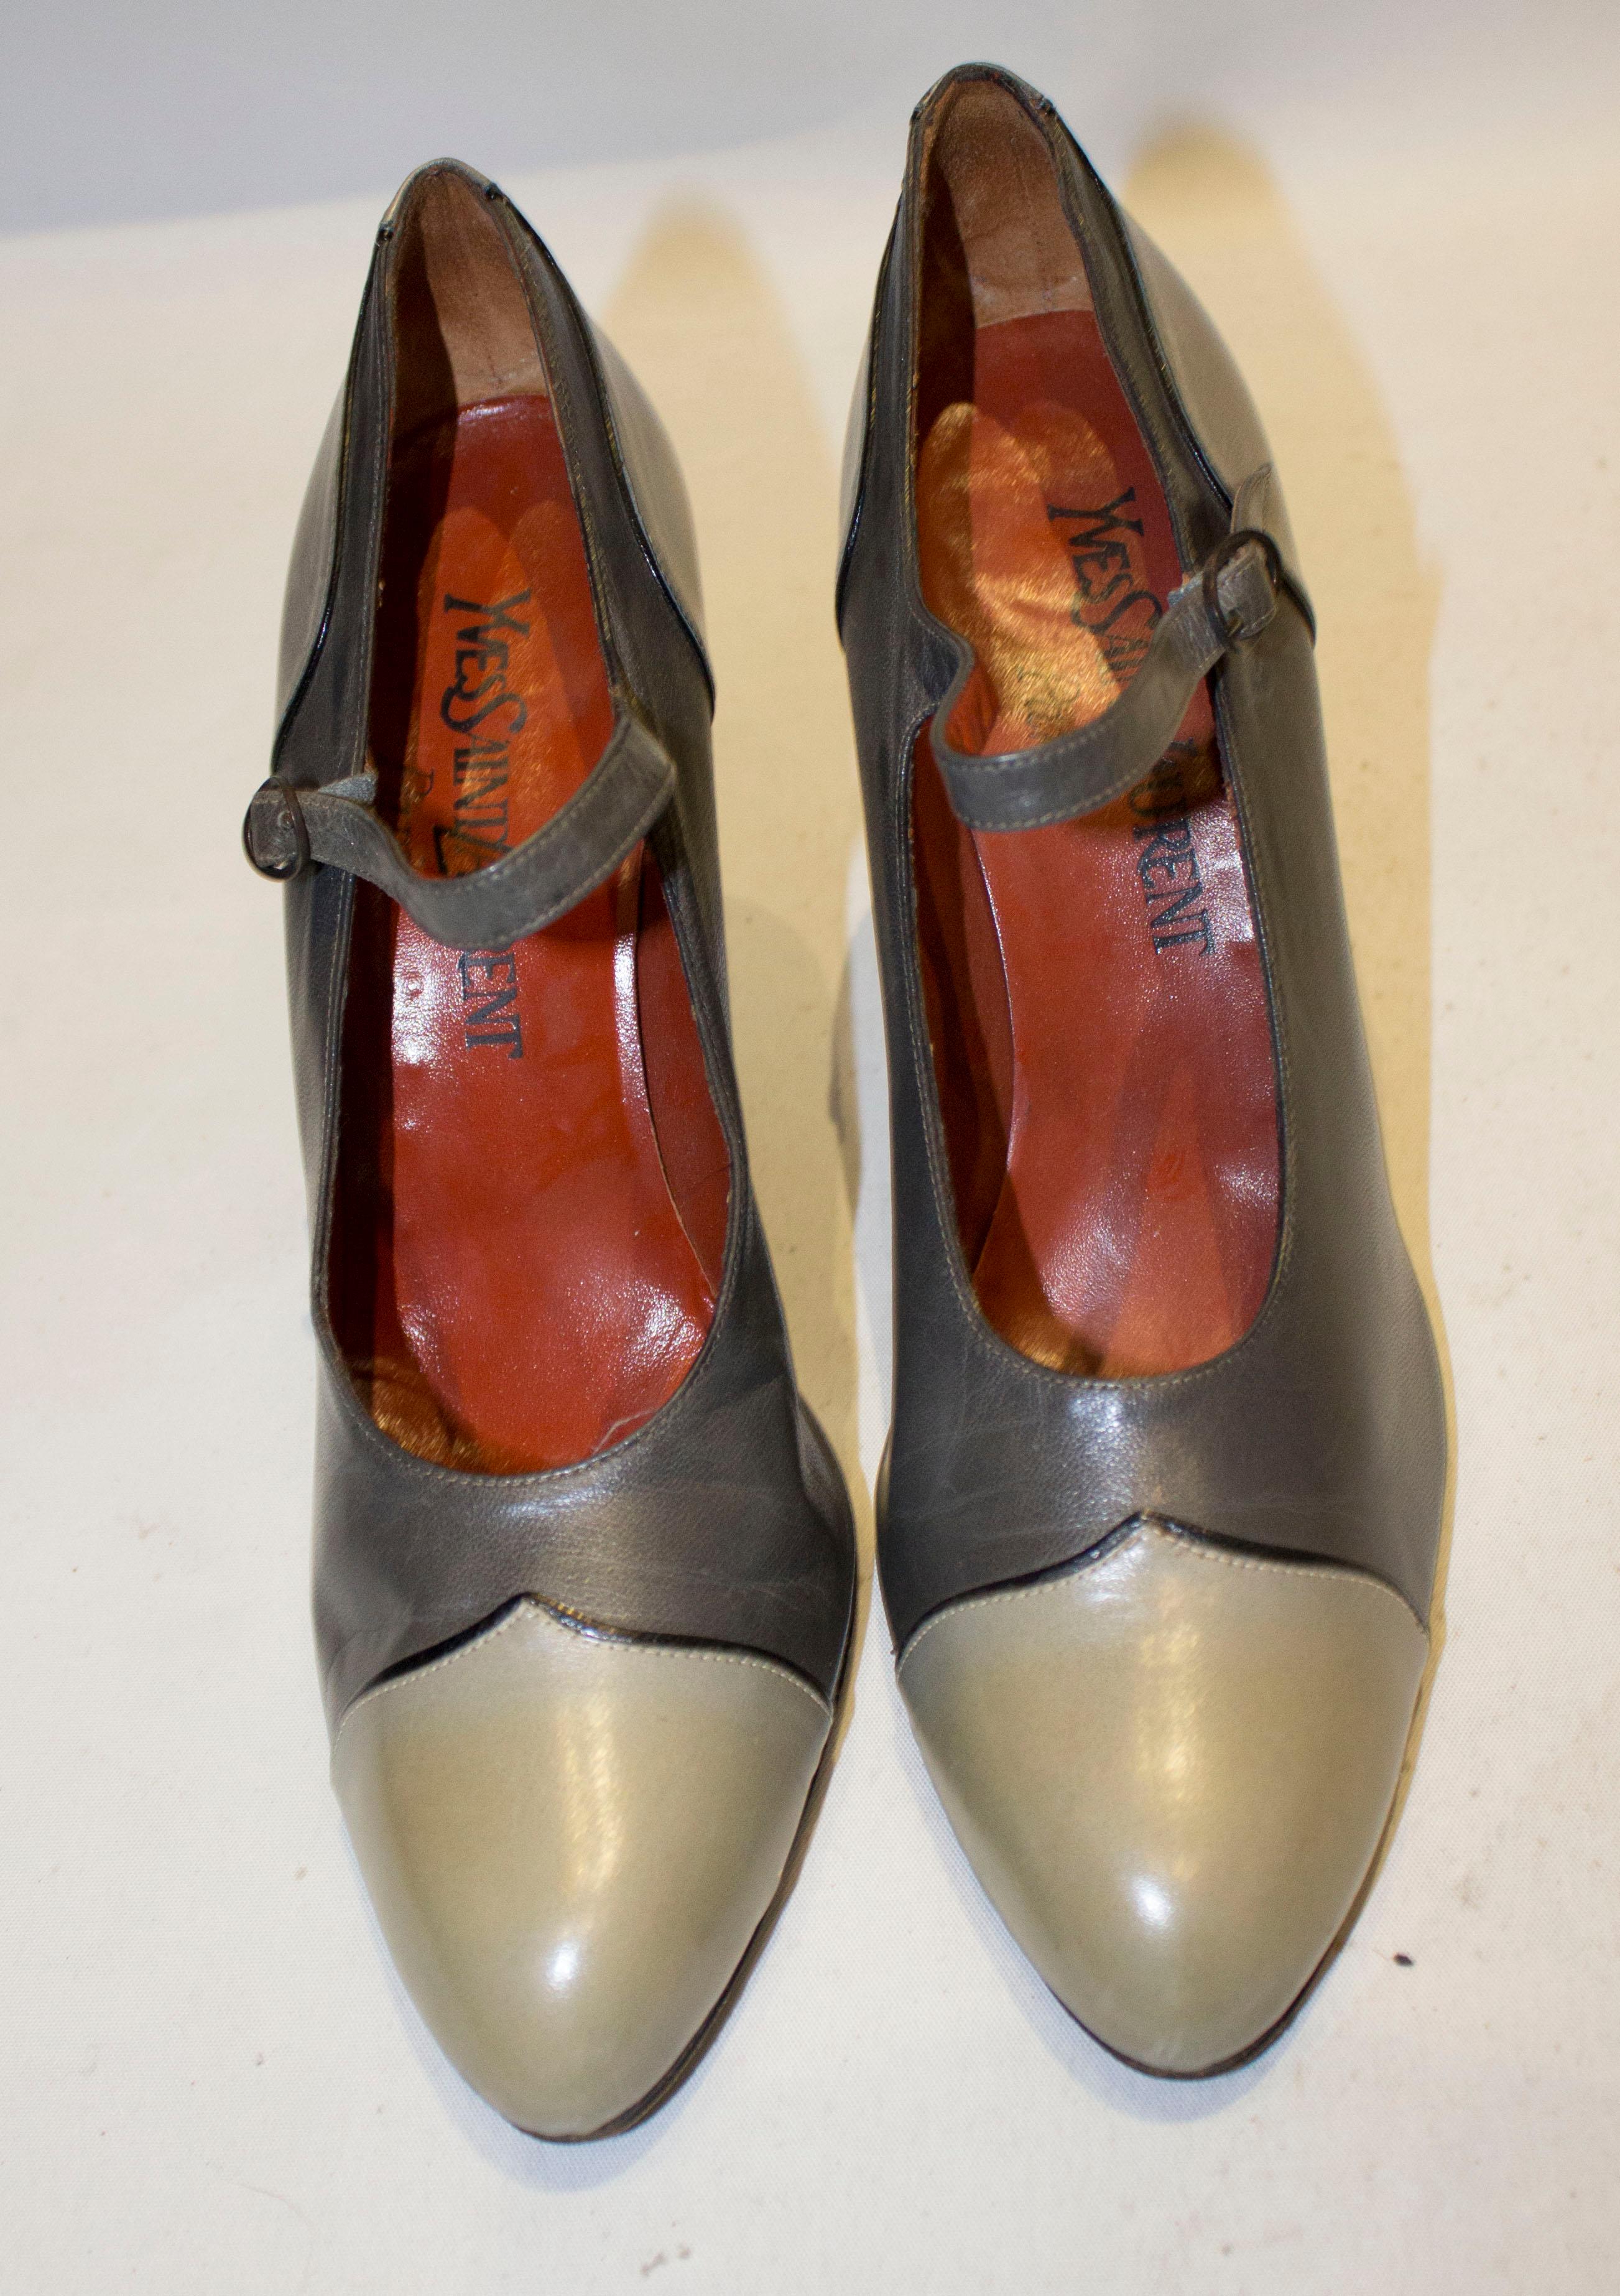 A chic pair of grey leather shoes by Yves Saibnt Laurent Paris. The shoes are in two shades of grey, style 008, size 38 1/2  and have a 4'' heel.